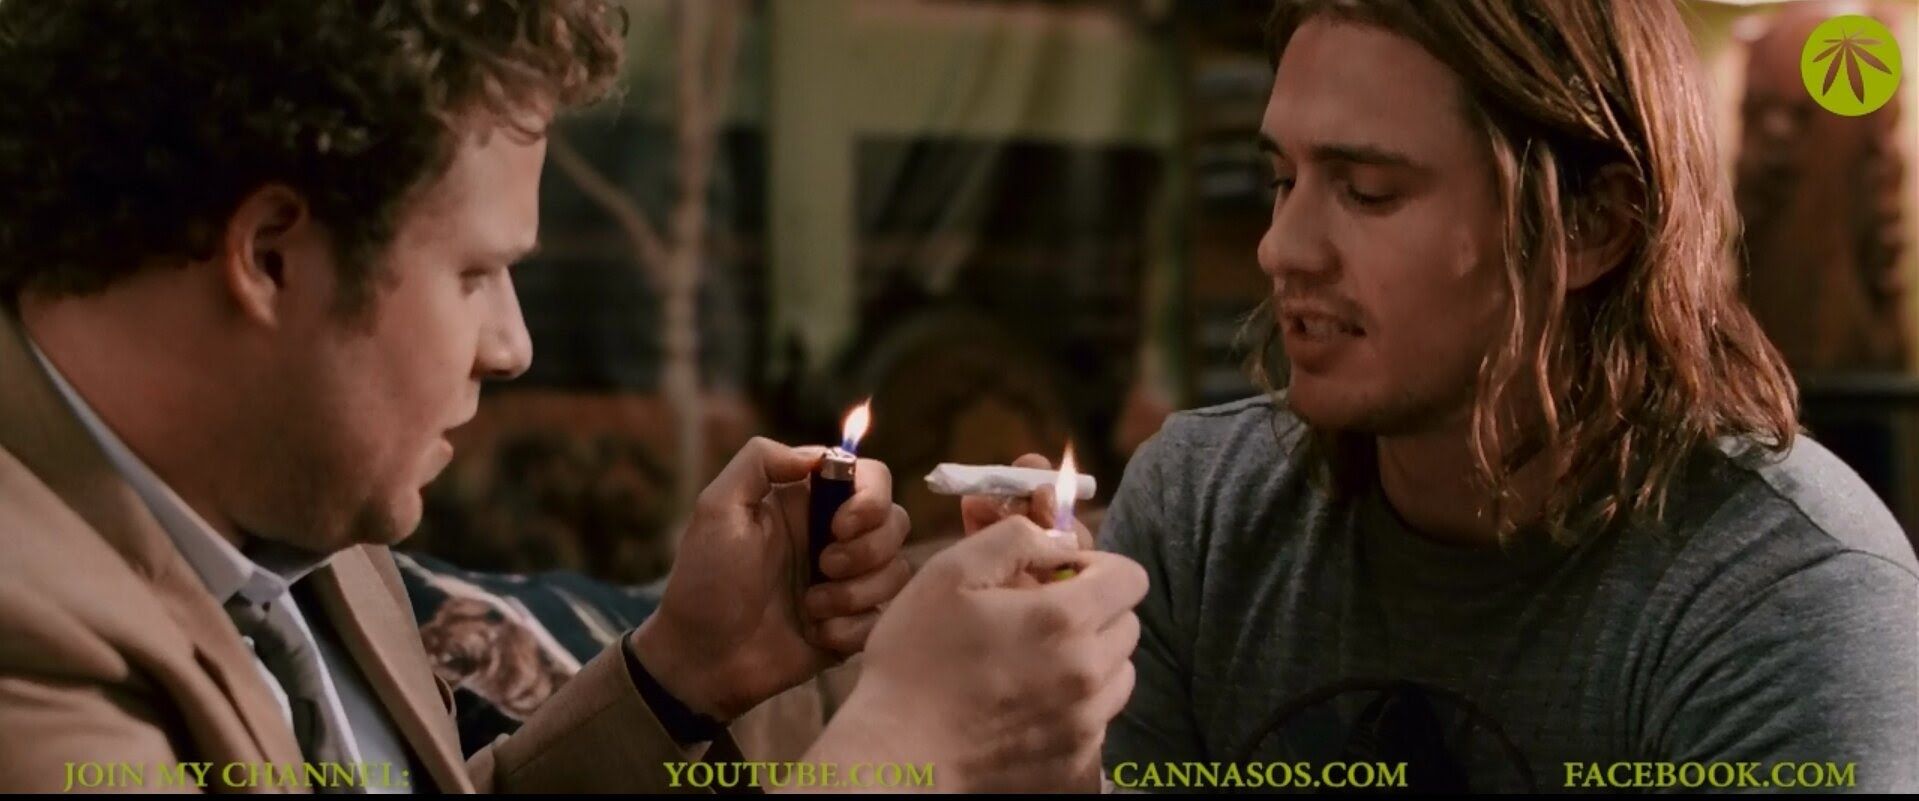 Pineapple Express wallpaper, Movie, HQ Pineapple Express picture